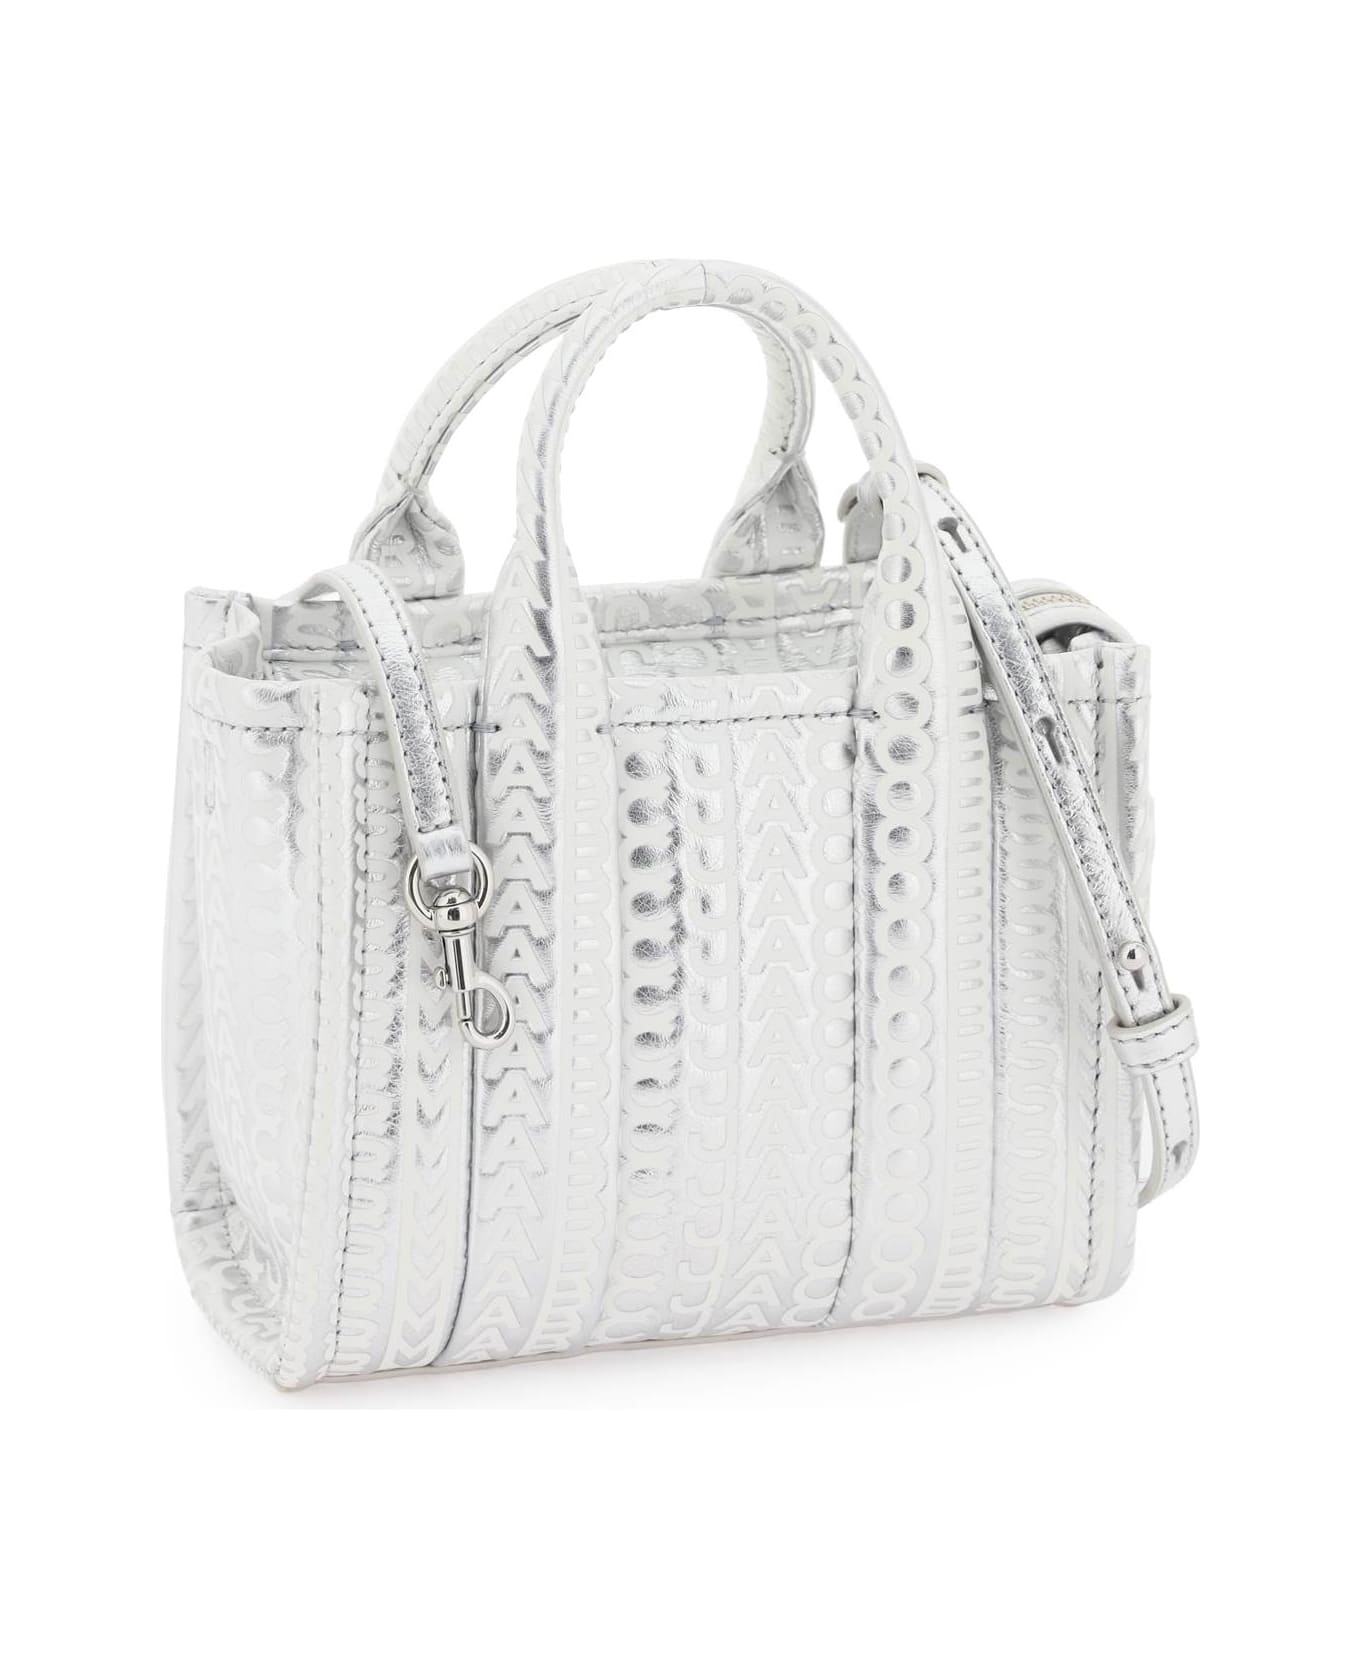 Marc Jacobs The Monogram Tote Bag - SILVER BRIGHT WHITE (Silver)